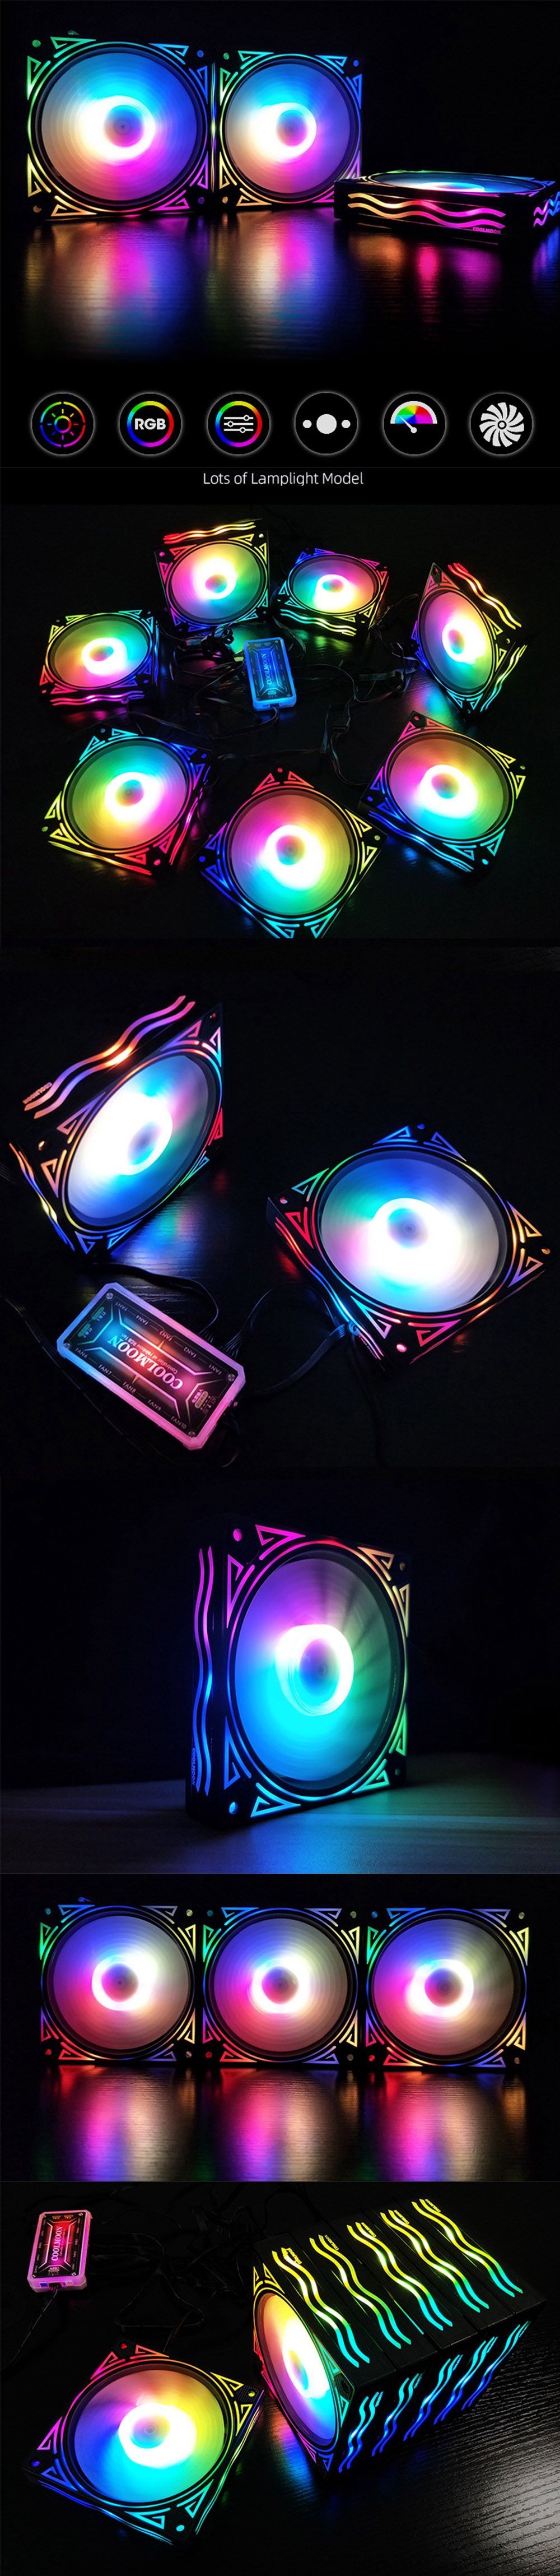 Coolmoon-BILLOW-3PCS-120mm-Multilayer-Backlit-RGB-Cooling-Fan-Mute-PC-CPU-Heatsink-with-the-RF-Wirel-1580400